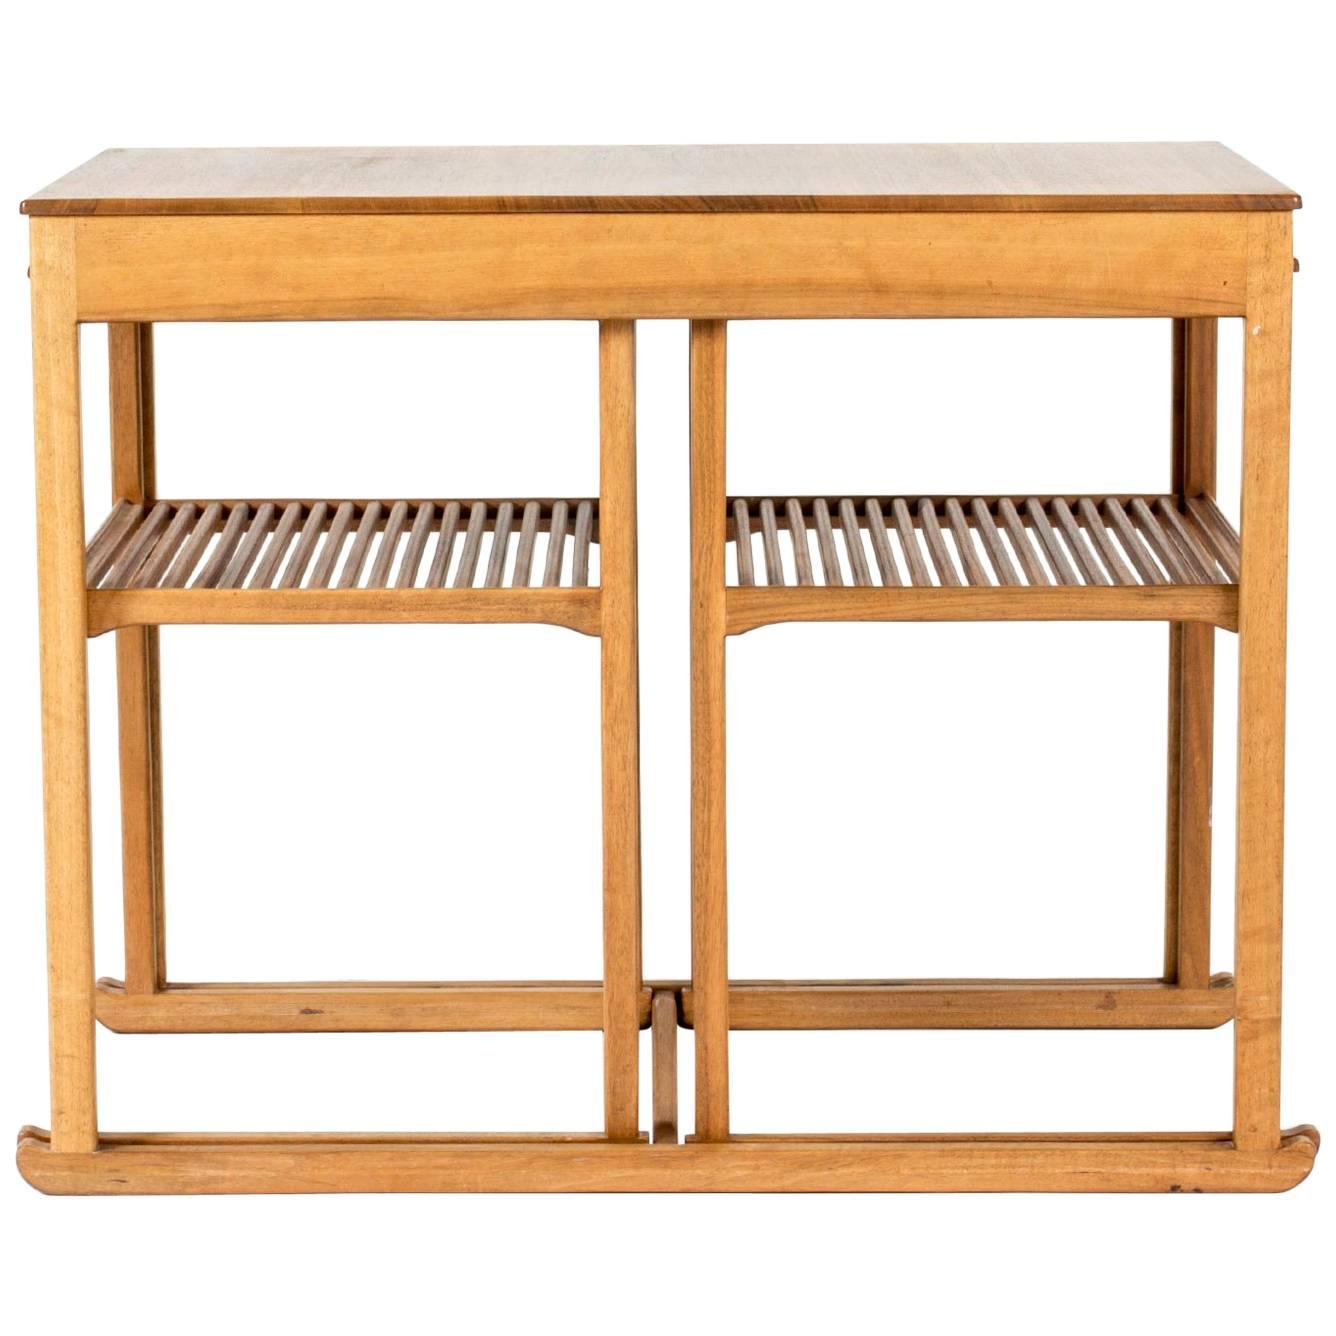 Walnut "The Sled" Nesting Table by Carl Malmsten